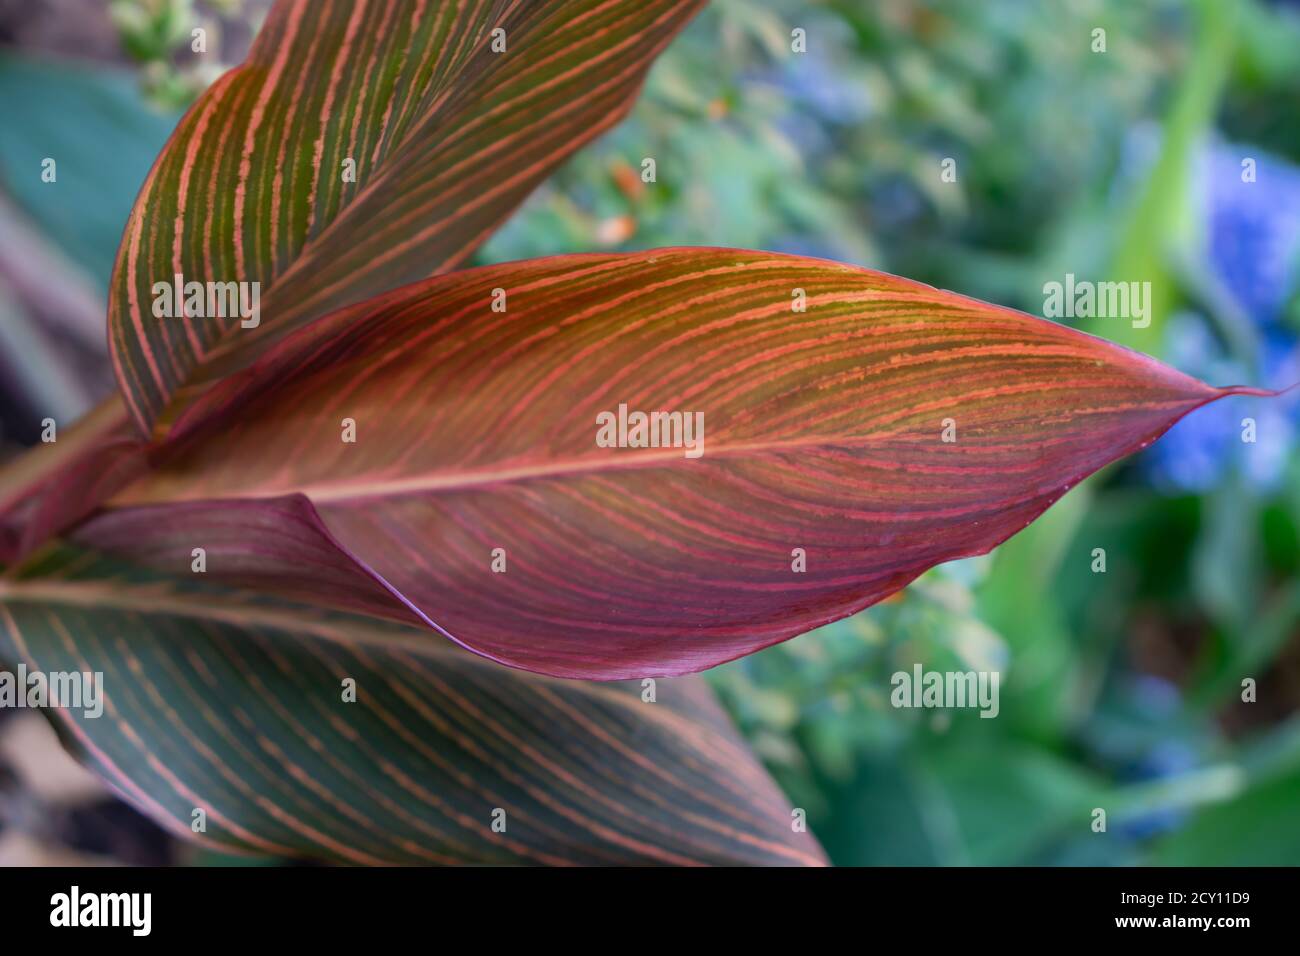 close up of red cordyline fruticosa leaf on a green blurry background. No main focus Stock Photo